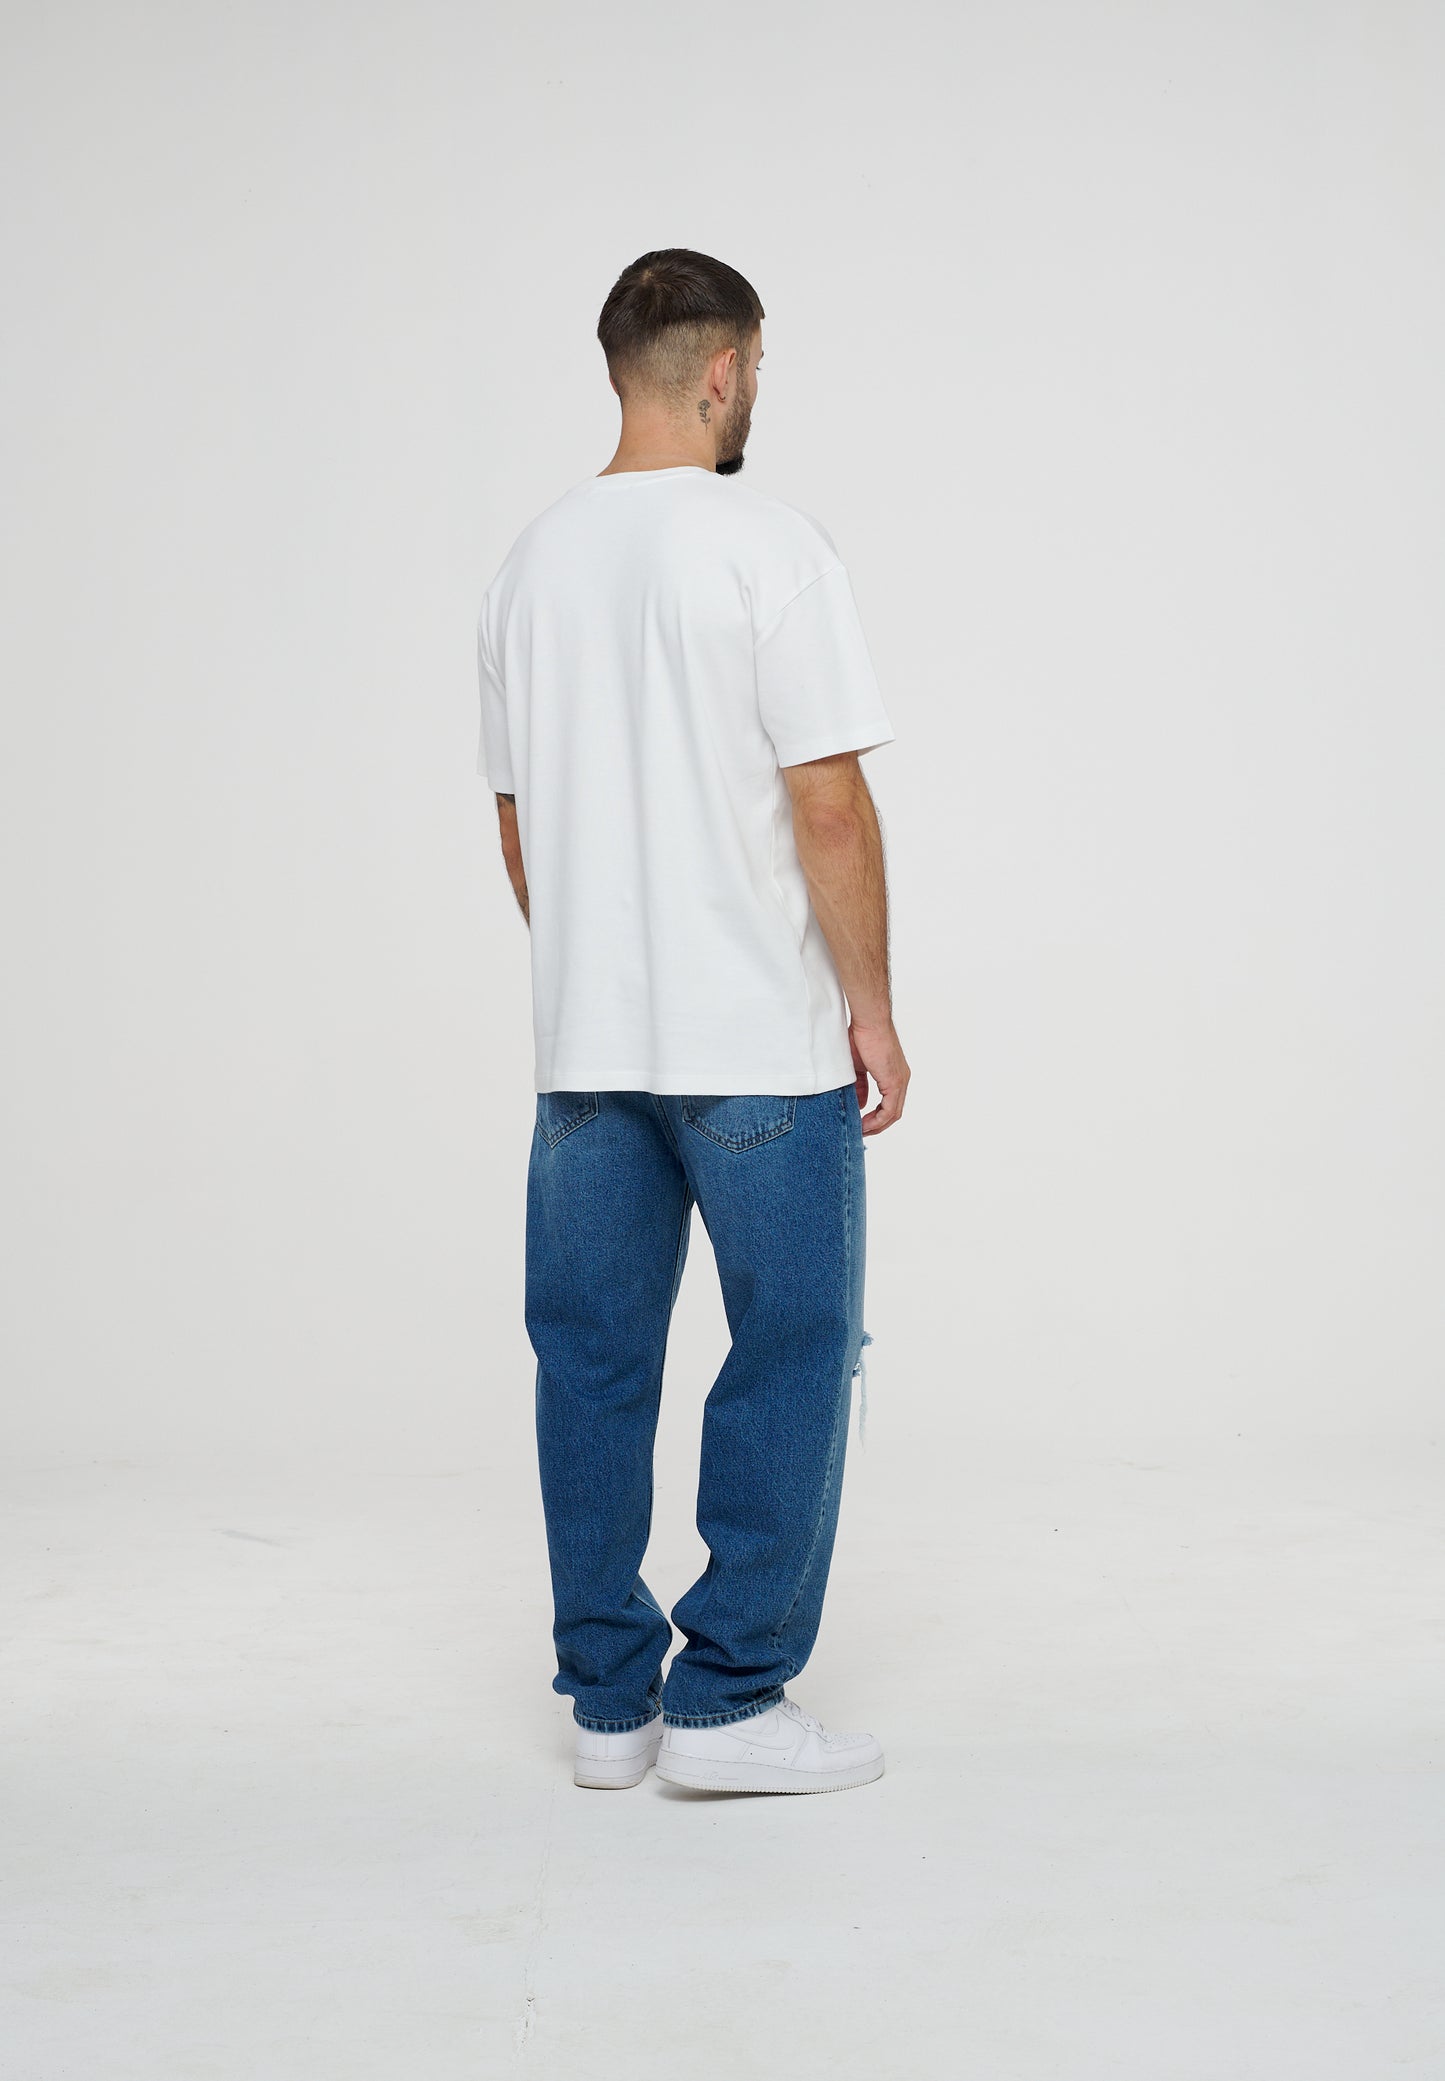 Destroyed Baggy Jeans 2YBGY0001 Blue